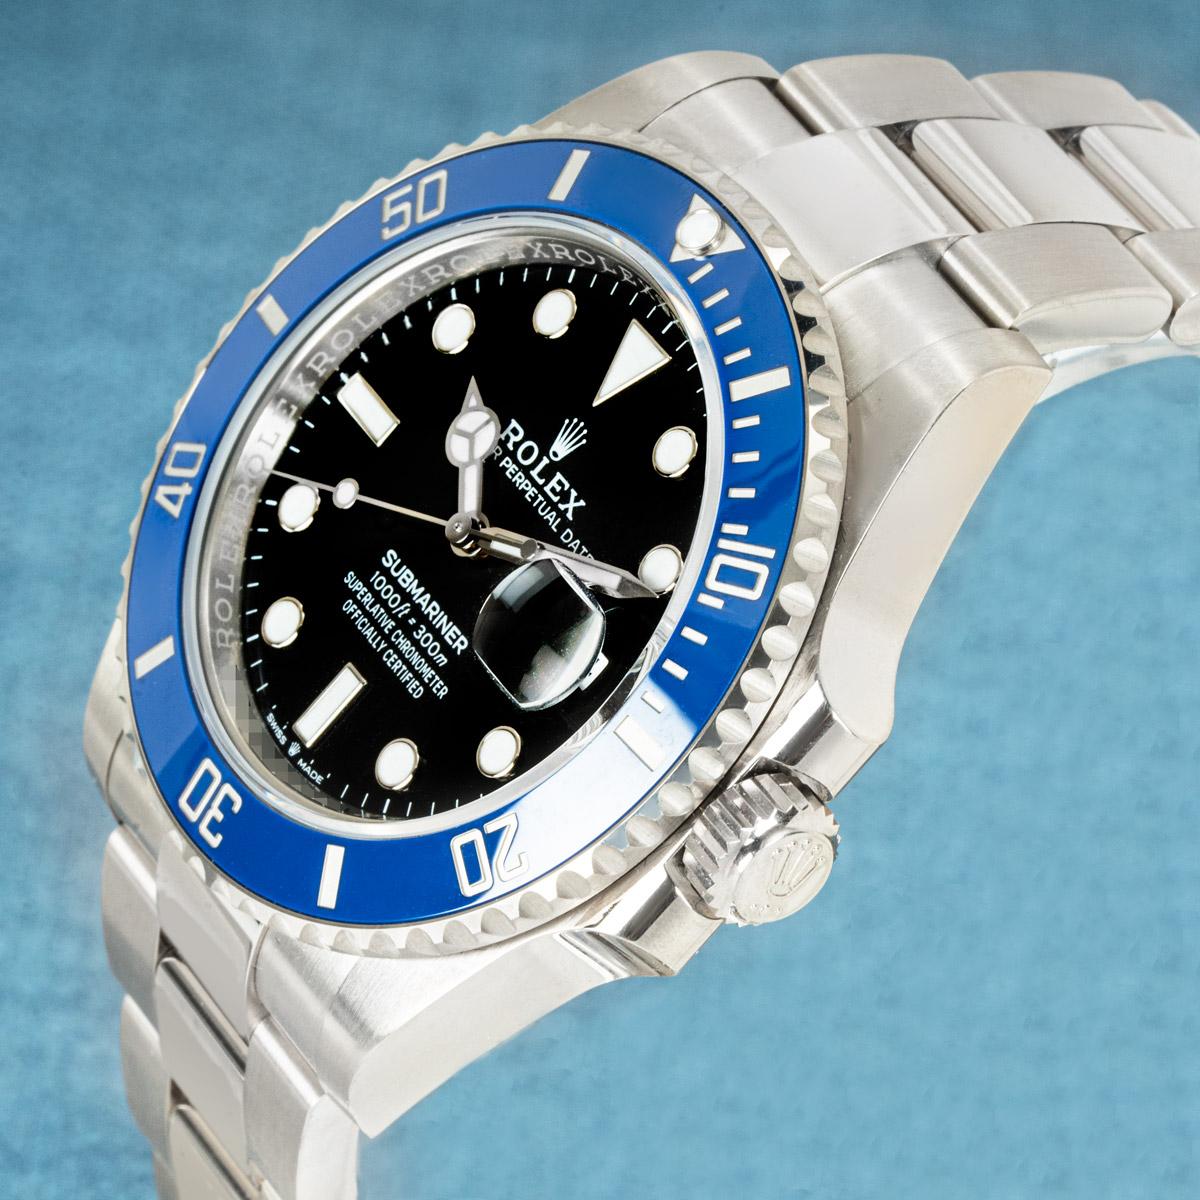 An unworn 41mm Submariner Date in white gold by Rolex. Featuring a black dial and a blue ceramic unidirectional rotatable bezel with 60 minute numerals and graduations coated in platinum.

The Oyster bracelet has a folding Oysterlock clasp with the